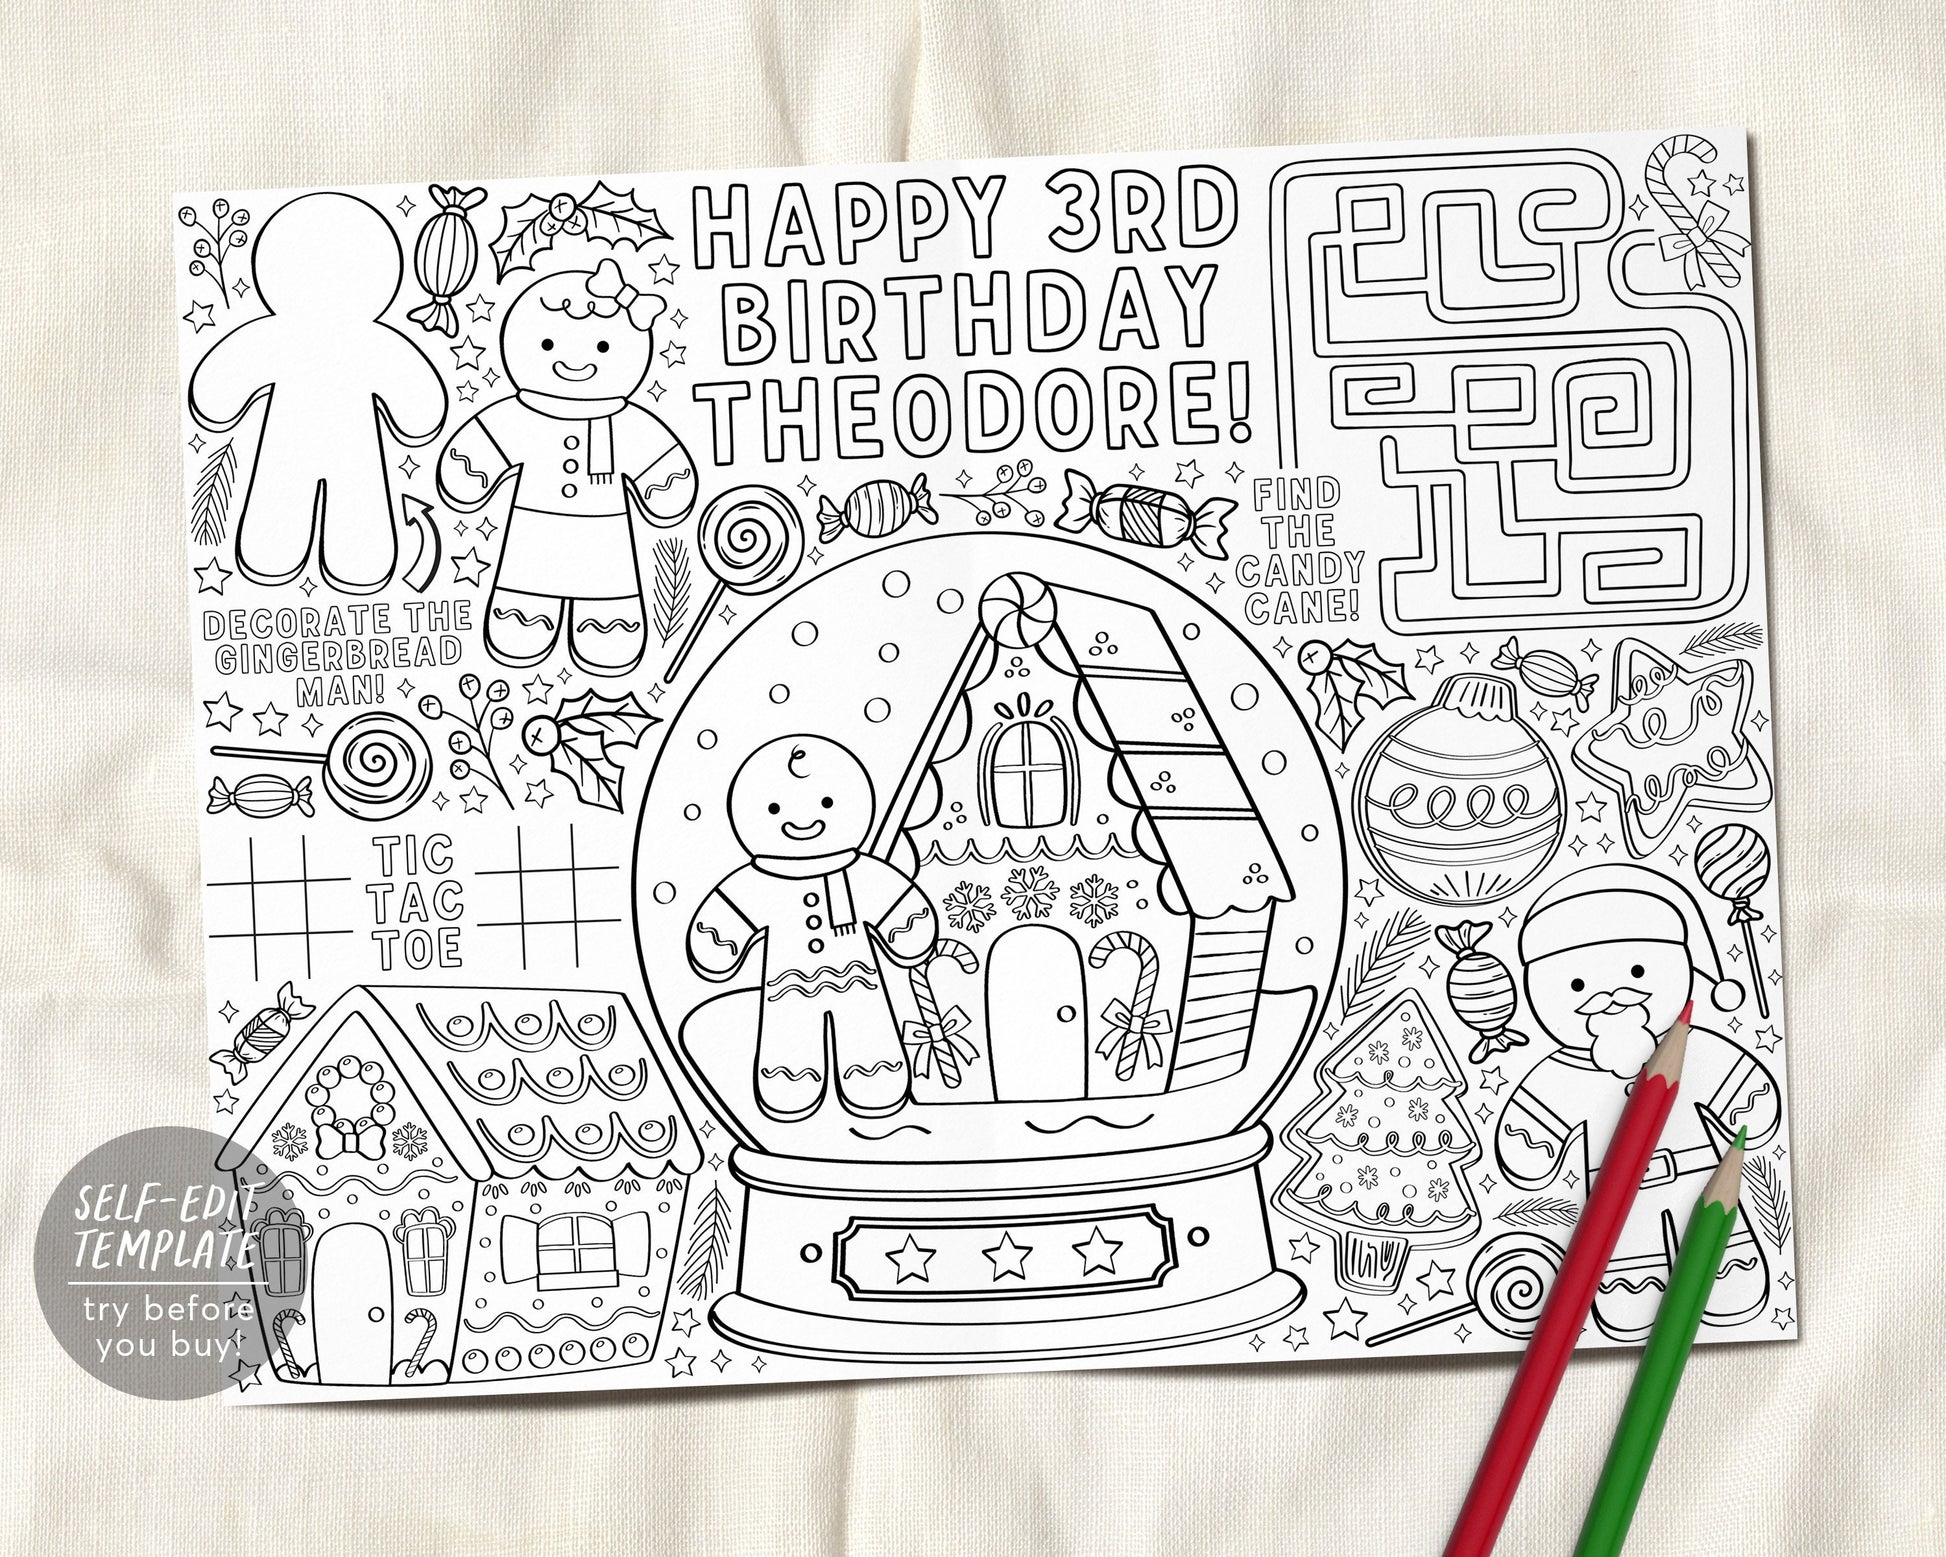 Gingerbread house decorating party birthday coloring page placemat edi â puff paper co